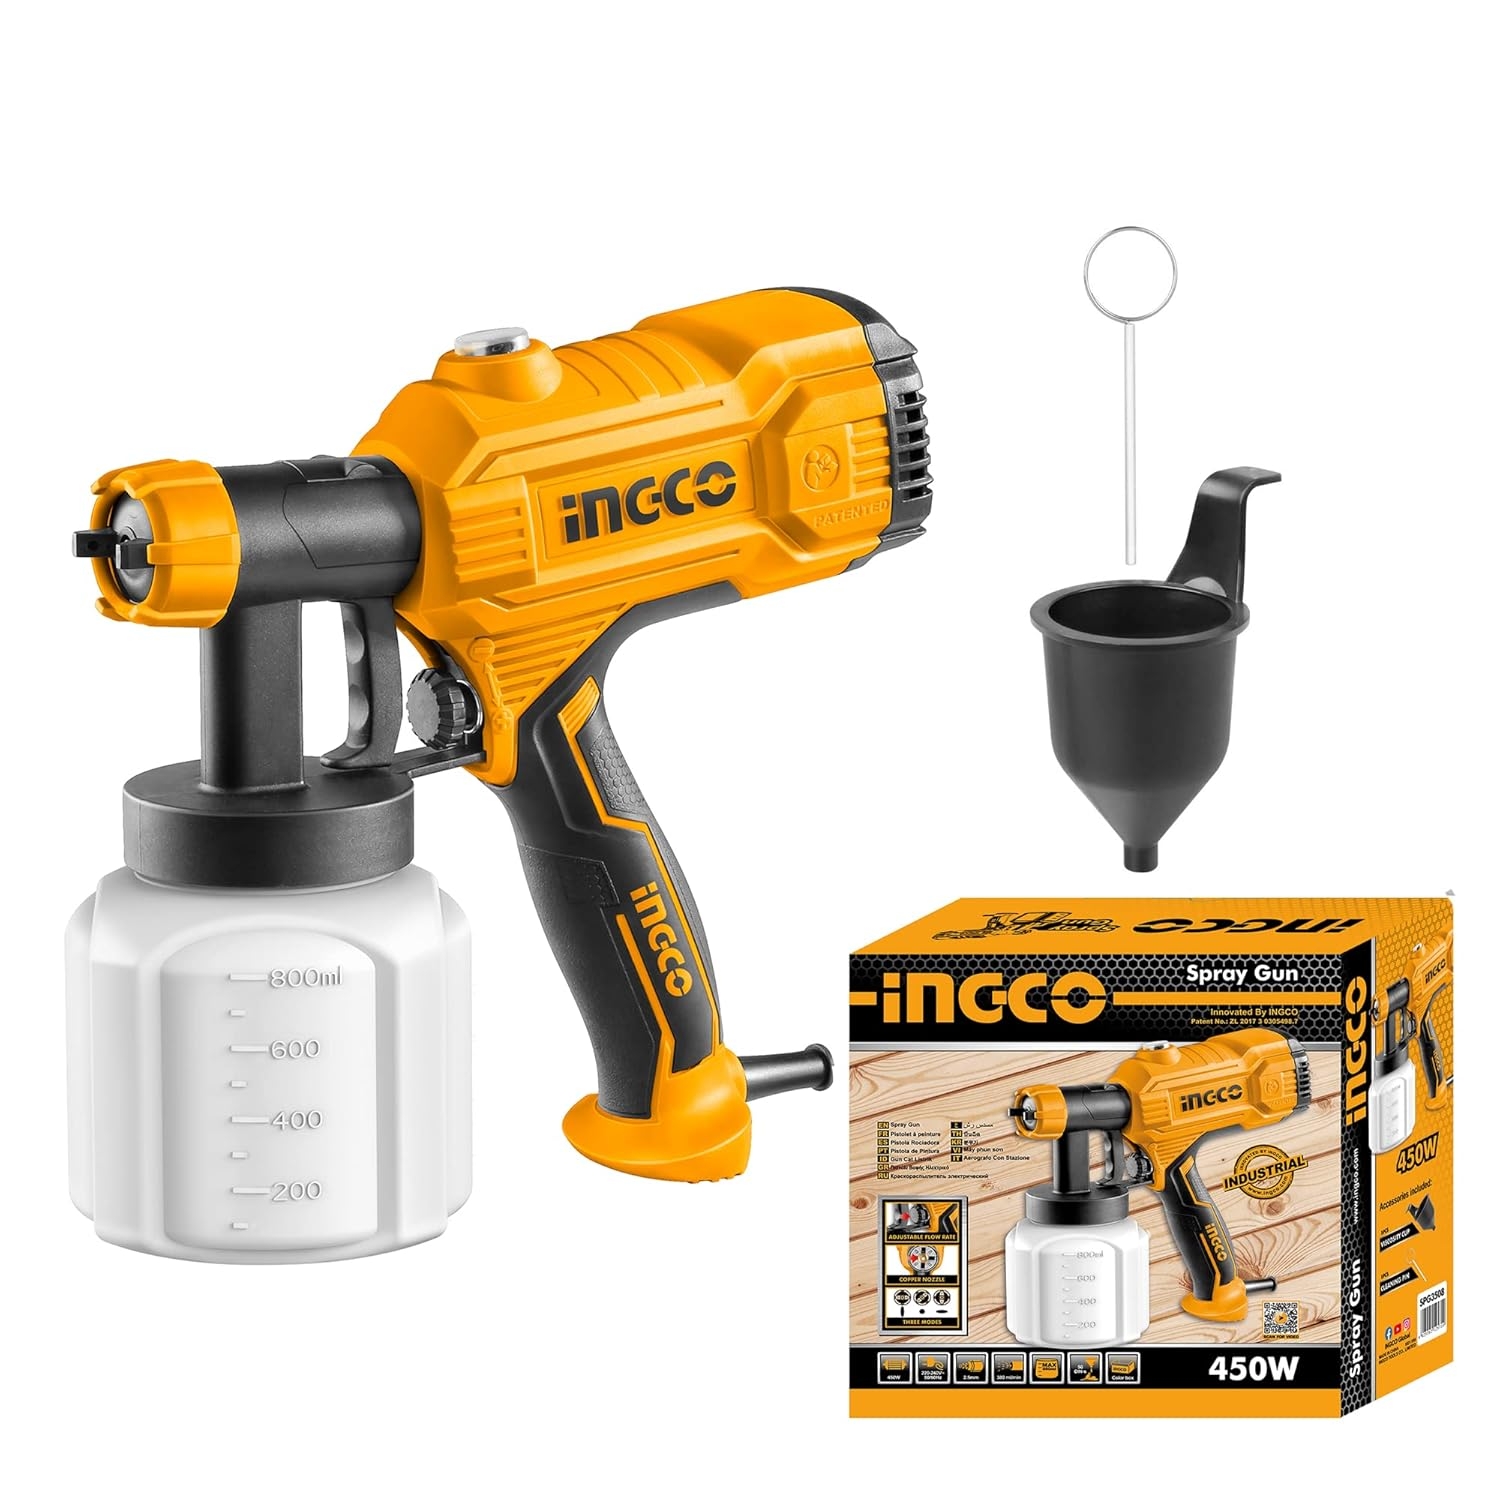 Ingco Spray Gun, 450W | 800Ml Electric Spray Gun | 1.5Mm Copper Nozzle | 50Din-S | 380 Ml/Min Paint Sprayer, Corded Painting Machine Suitable For Base Coat Spray Gun For Auto Paint, Hand Powered Paint Sprayers